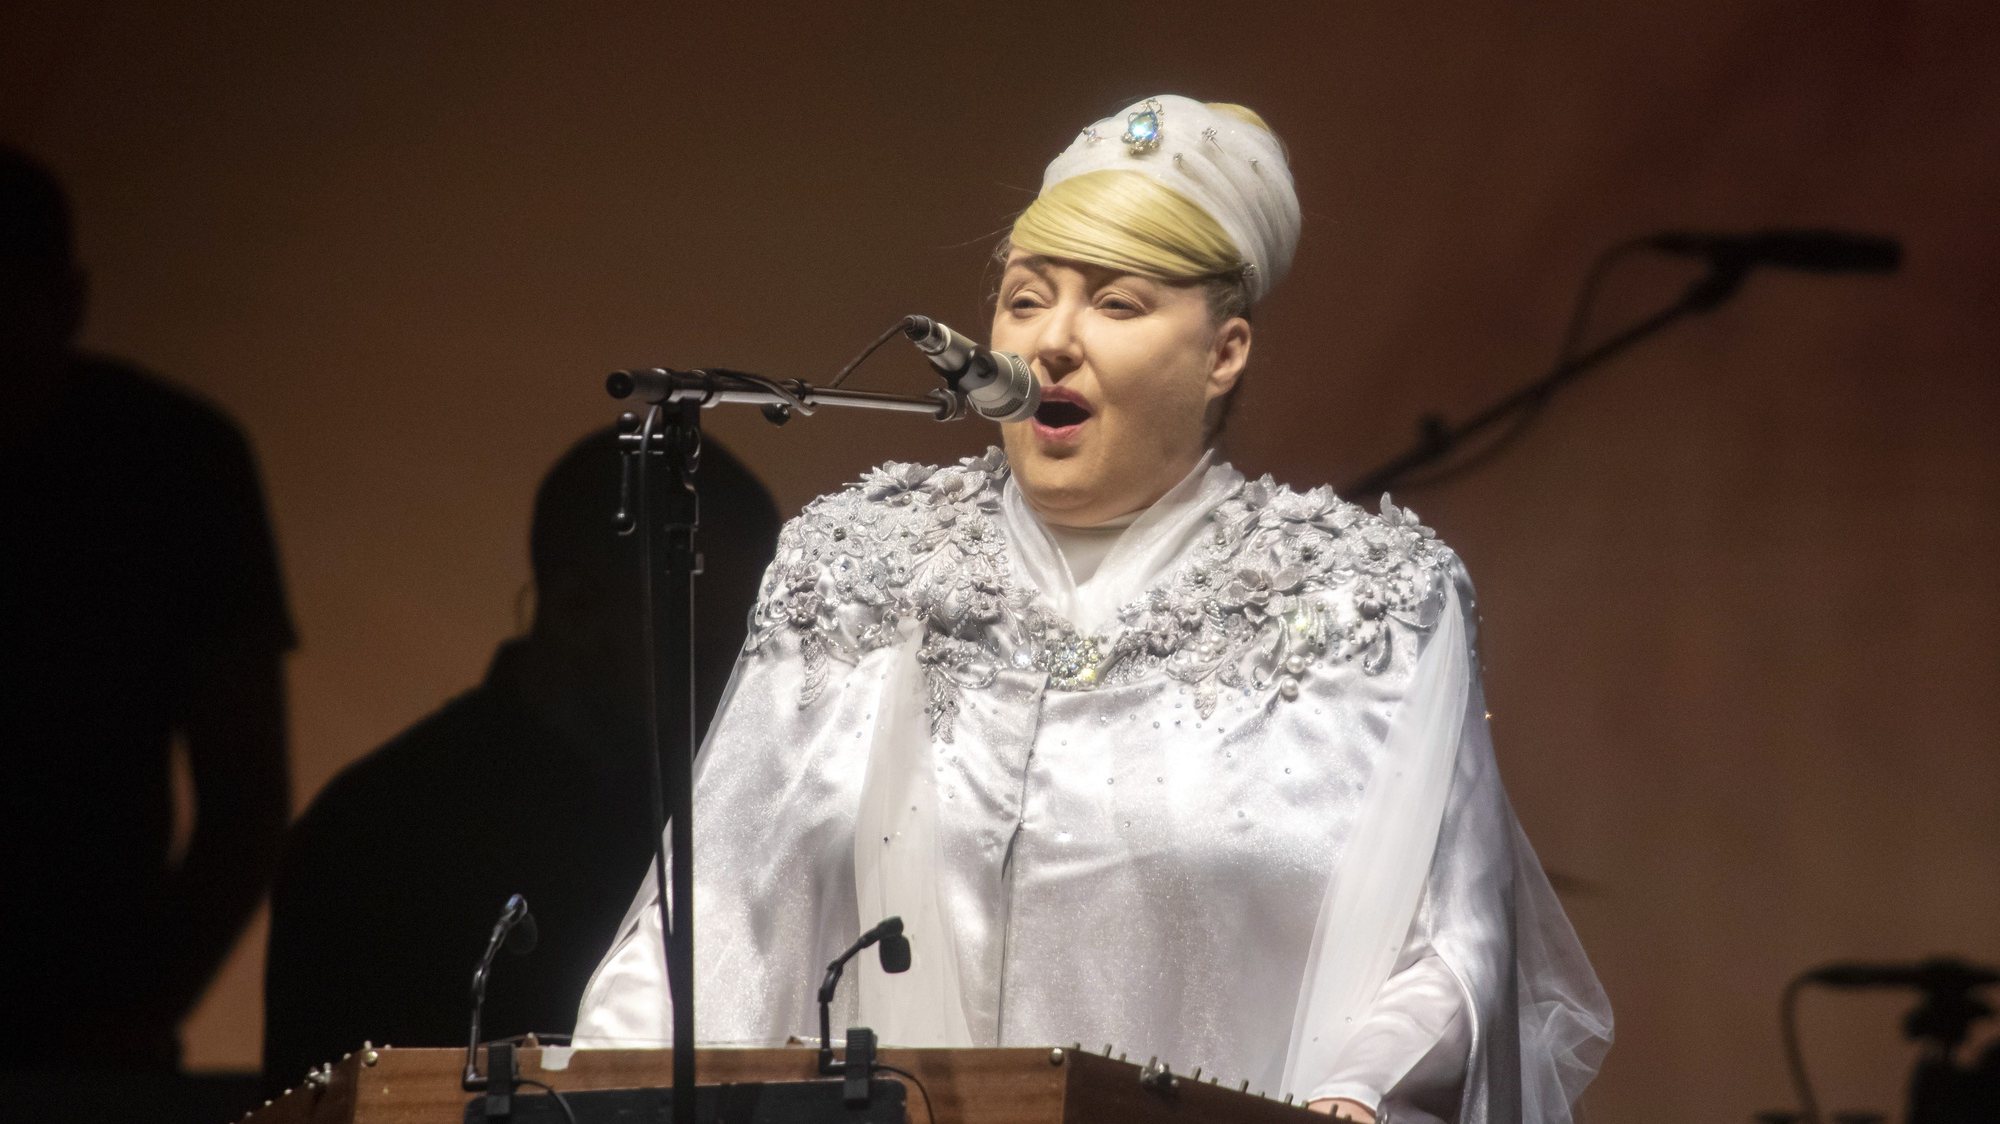 epa07675682 Lisa Gerrard of the Australian band Dead Can Dance performs during their concert at the Papp Laszlo Budapest Sports Arena, in Budapest, Hungary, 26 June 2019.  EPA/Balazs Mohai HUNGARY OUT